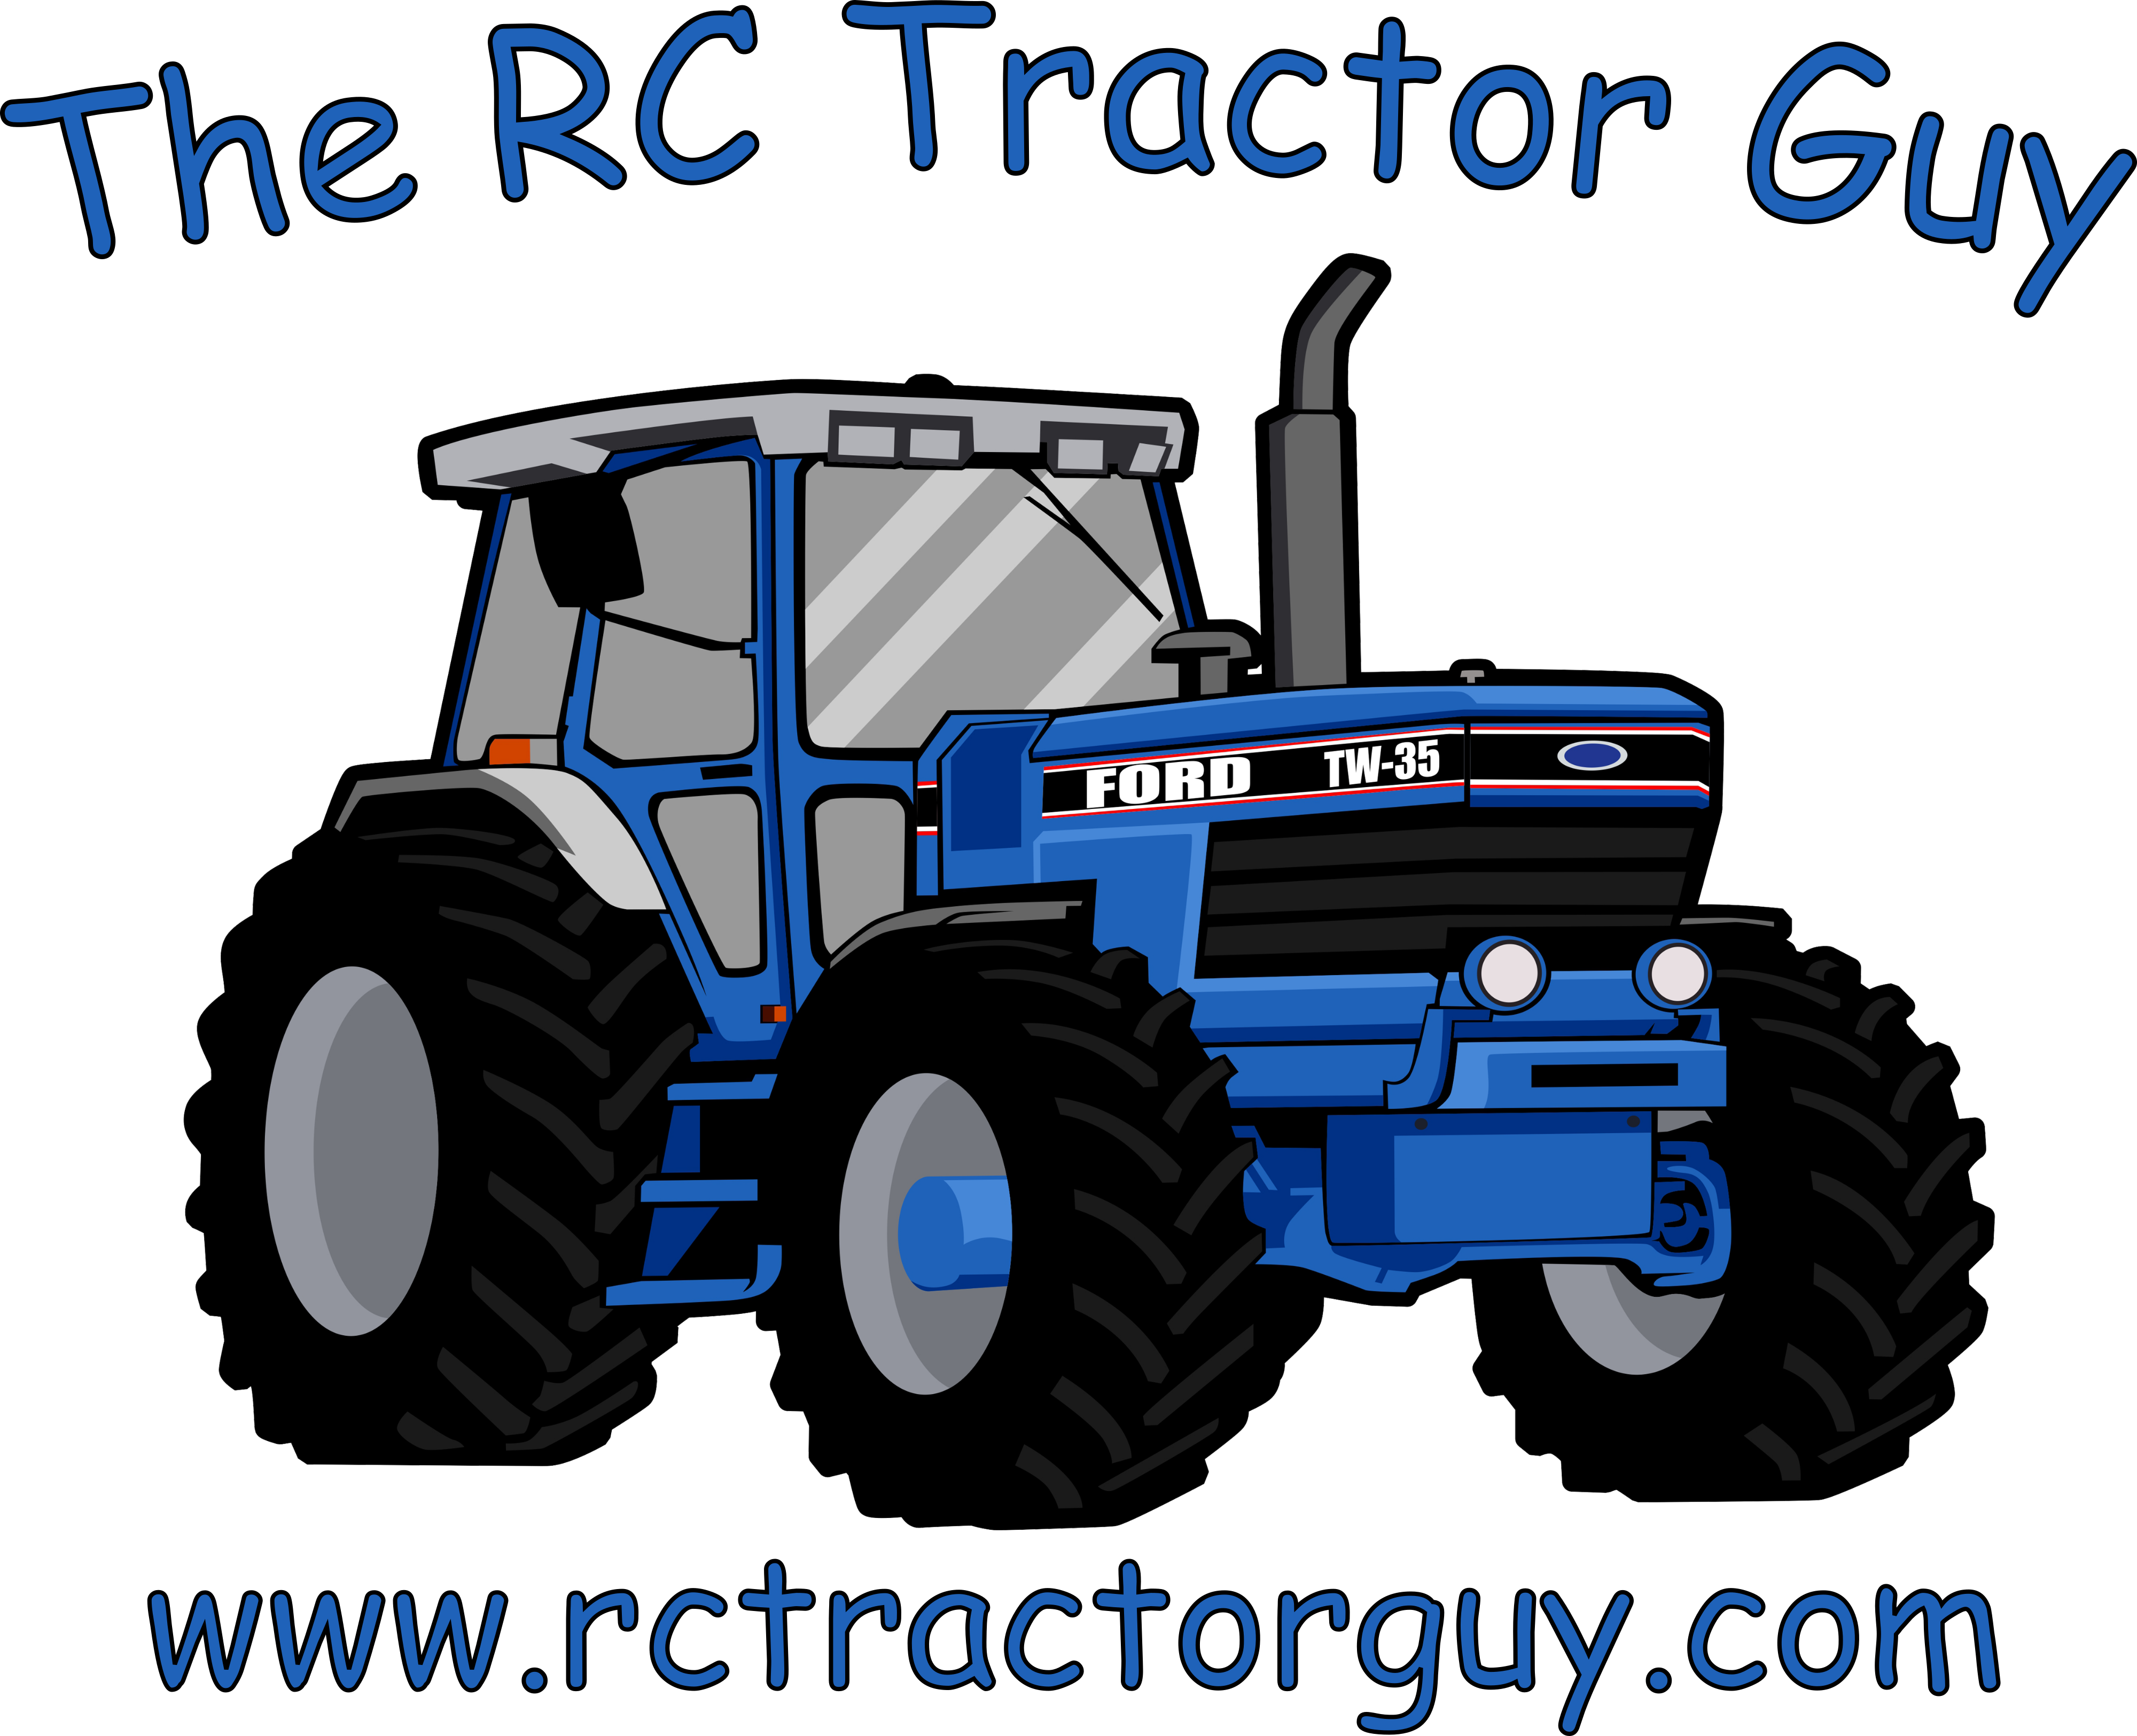 for sale online SIKU 3470 Ferguson Te Tractor With Driver Diecast Model in 1 32 Scale 